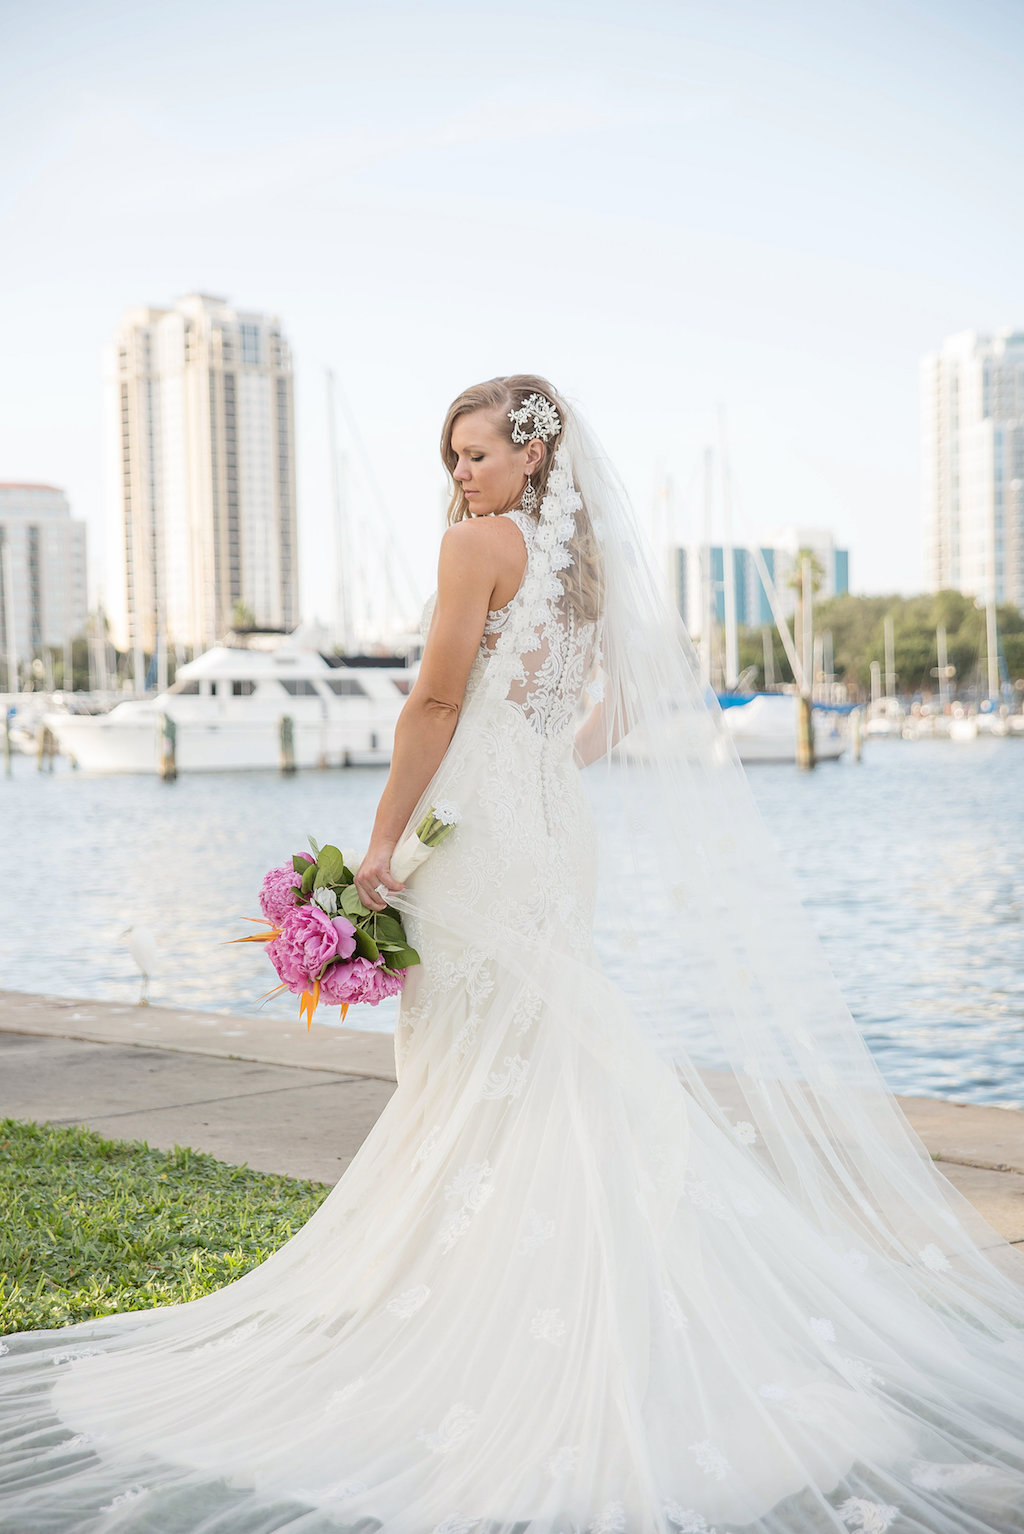 Outdoor Waterfront Bridal Portrait with Pink Peony with Greenery Bouquet and Long Vintage Wedding Veil | St Pete Wedding Photographer Kristen Marie Photography